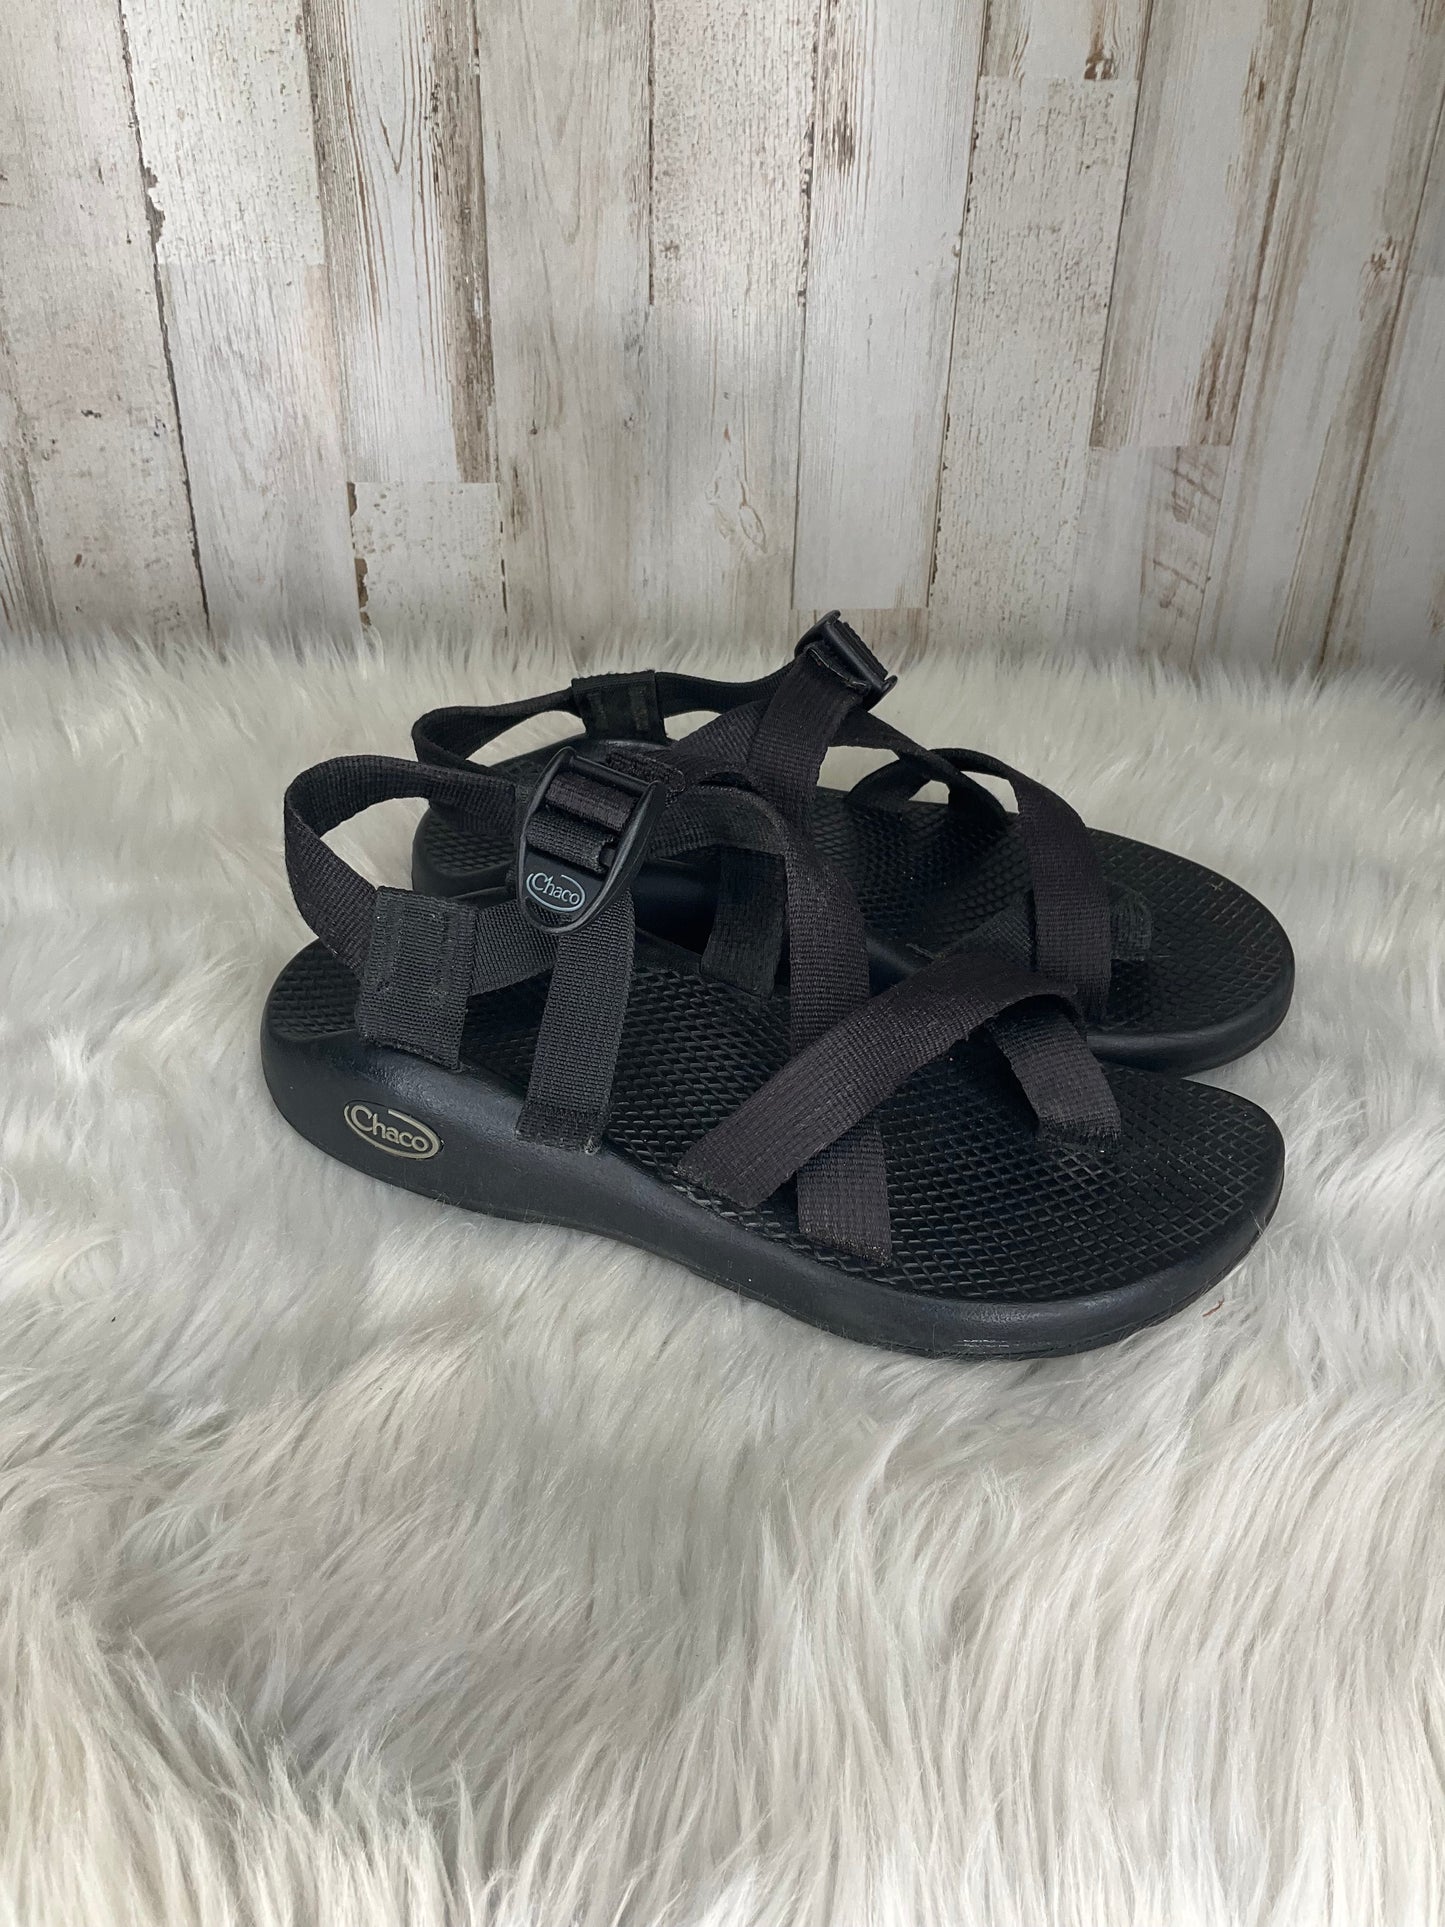 Black Sandals Sport Chacos, Size 7